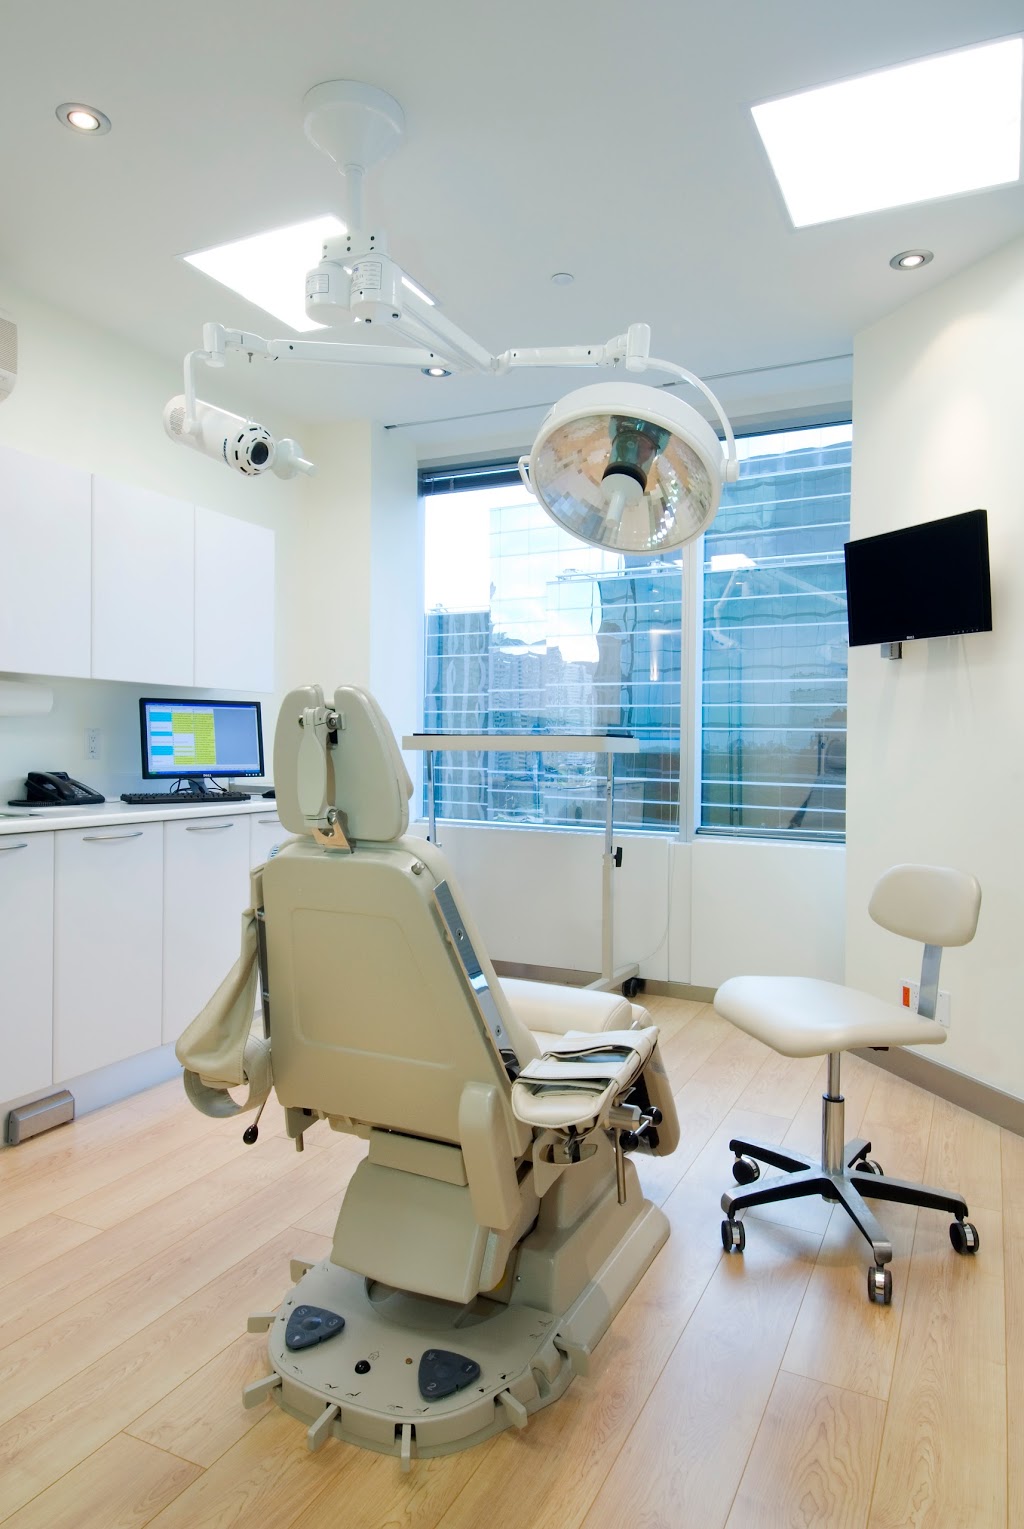 North York Oral Maxillofacial Surgery Centre | doctor | 100 Sheppard Ave E, North York, ON M2N 6N5, Canada | 4162216656 OR +1 416-221-6656